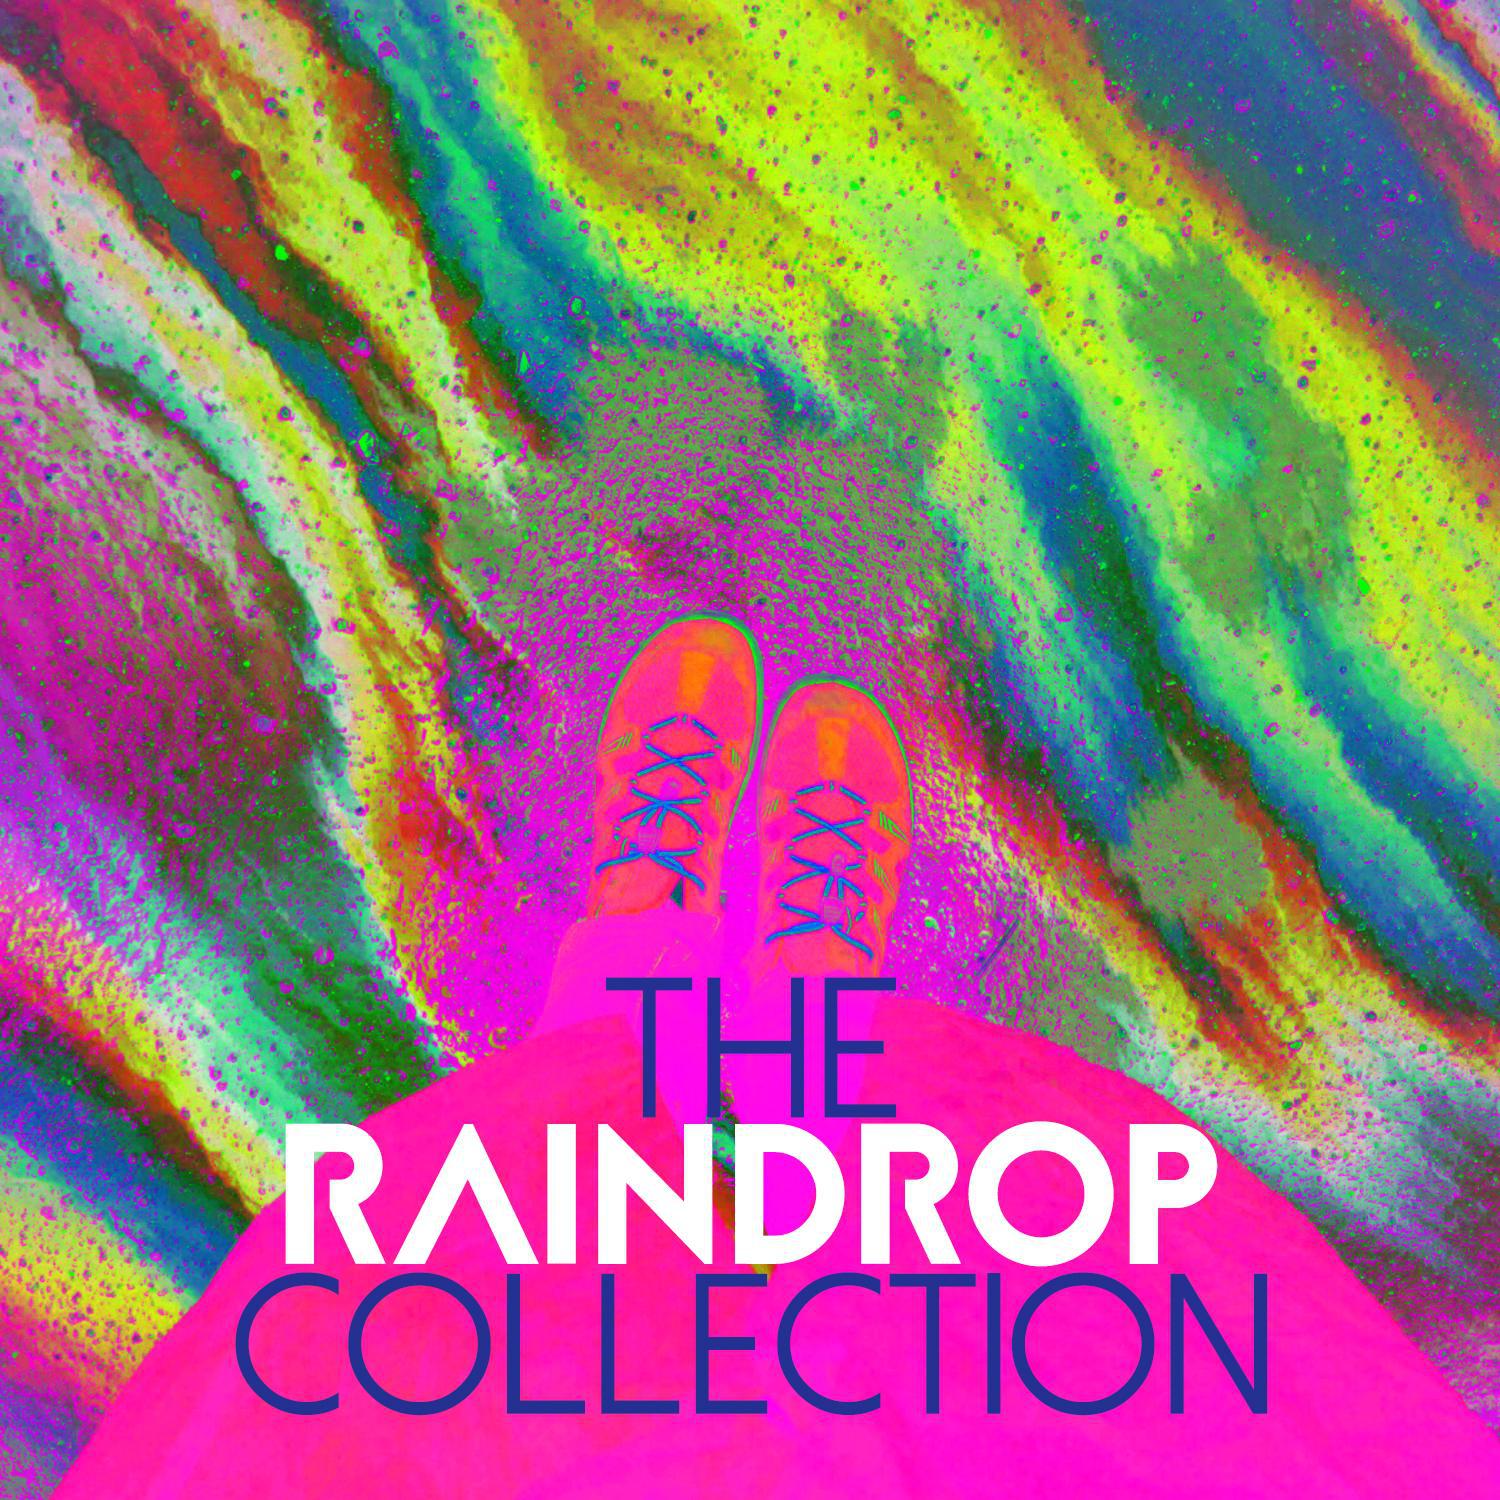 The Raindrop Collection